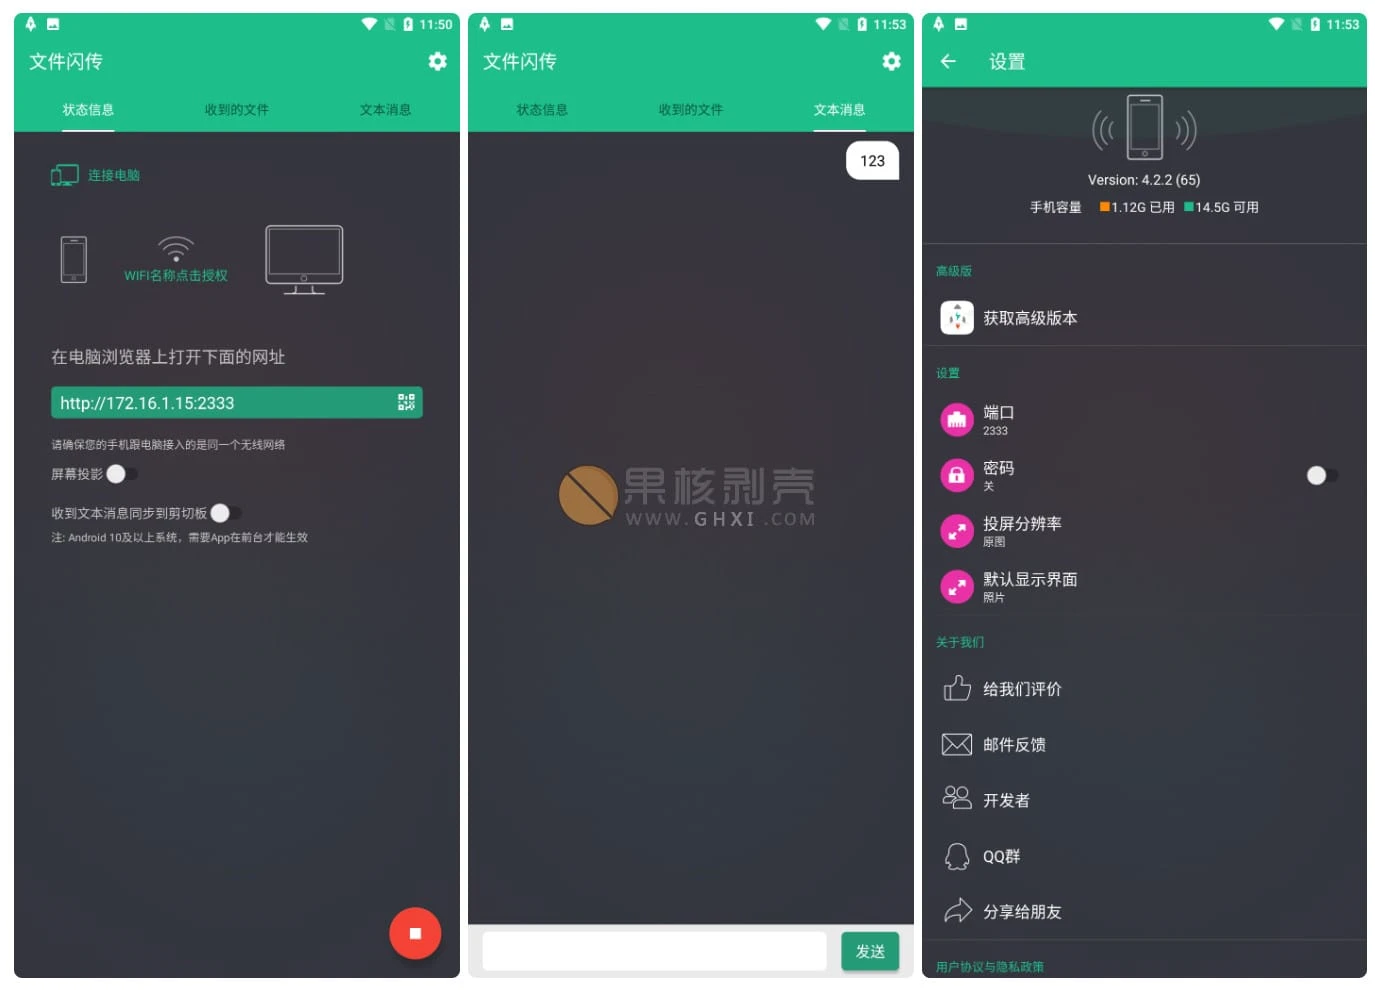 Android 文件闪传 v4.2.2